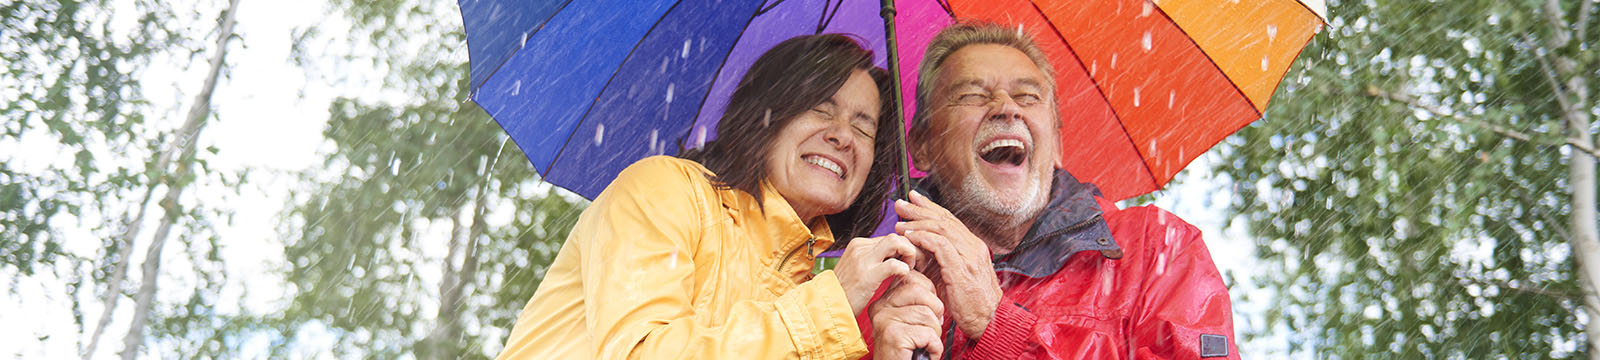 image of couple laughing under colorful umbrella in rain storm